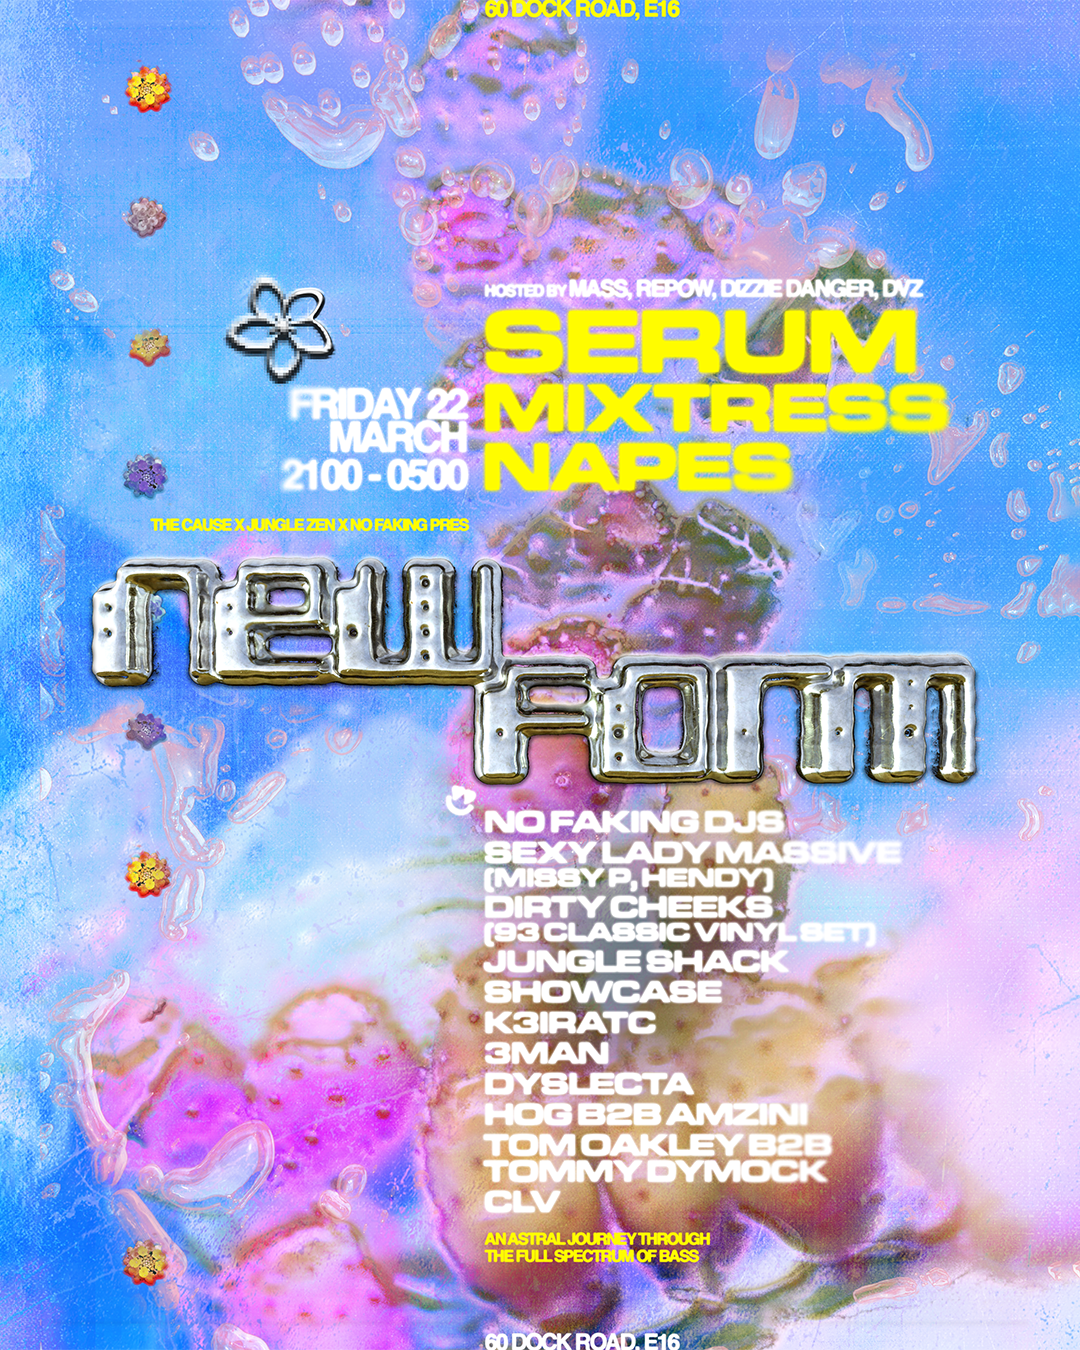 The Cause: New Form w/ Serum, mixtress, Napes + more - フライヤー表